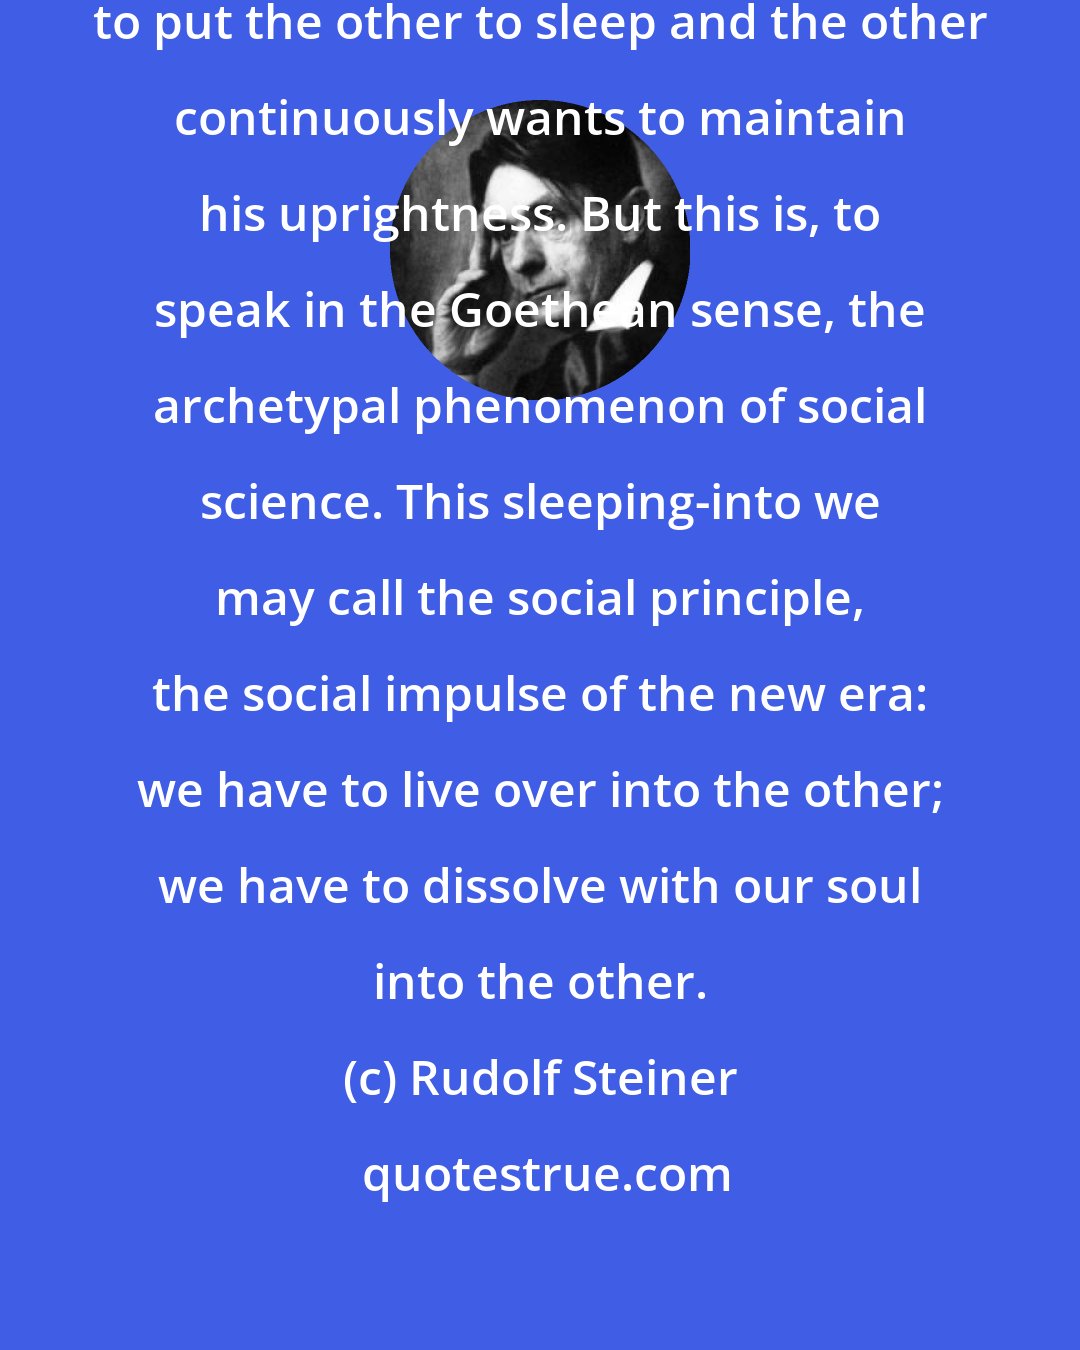 Rudolf Steiner: When man faces man the one attempts to put the other to sleep and the other continuously wants to maintain his uprightness. But this is, to speak in the Goethean sense, the archetypal phenomenon of social science. This sleeping-into we may call the social principle, the social impulse of the new era: we have to live over into the other; we have to dissolve with our soul into the other.